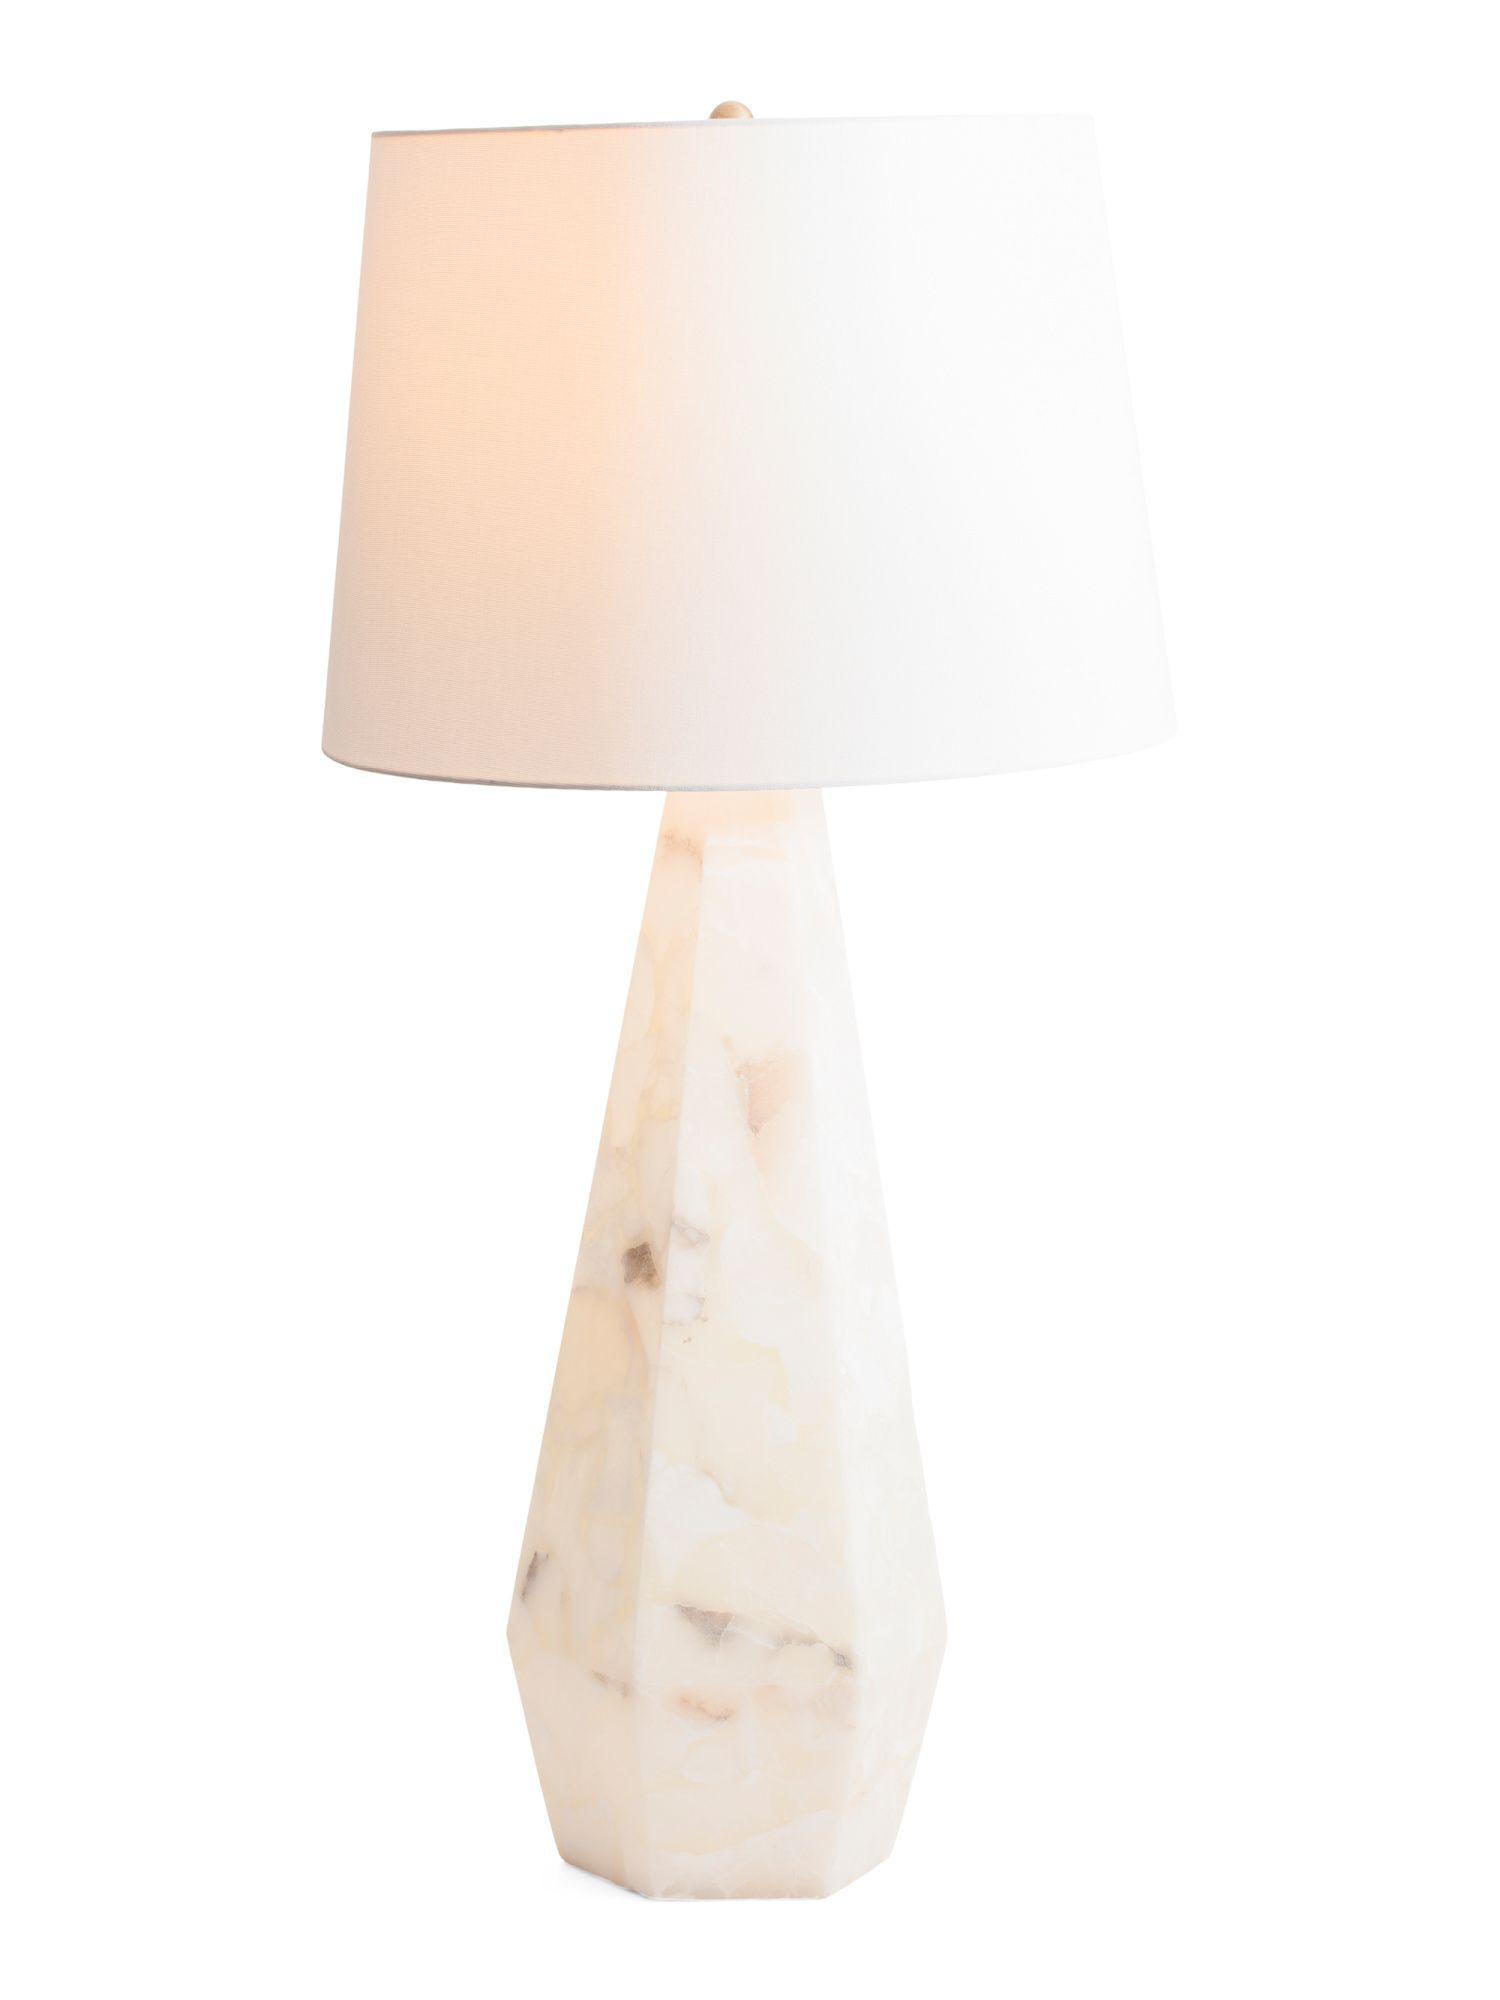 37in Alabaster 6 Sided Table Lamp | Marshalls